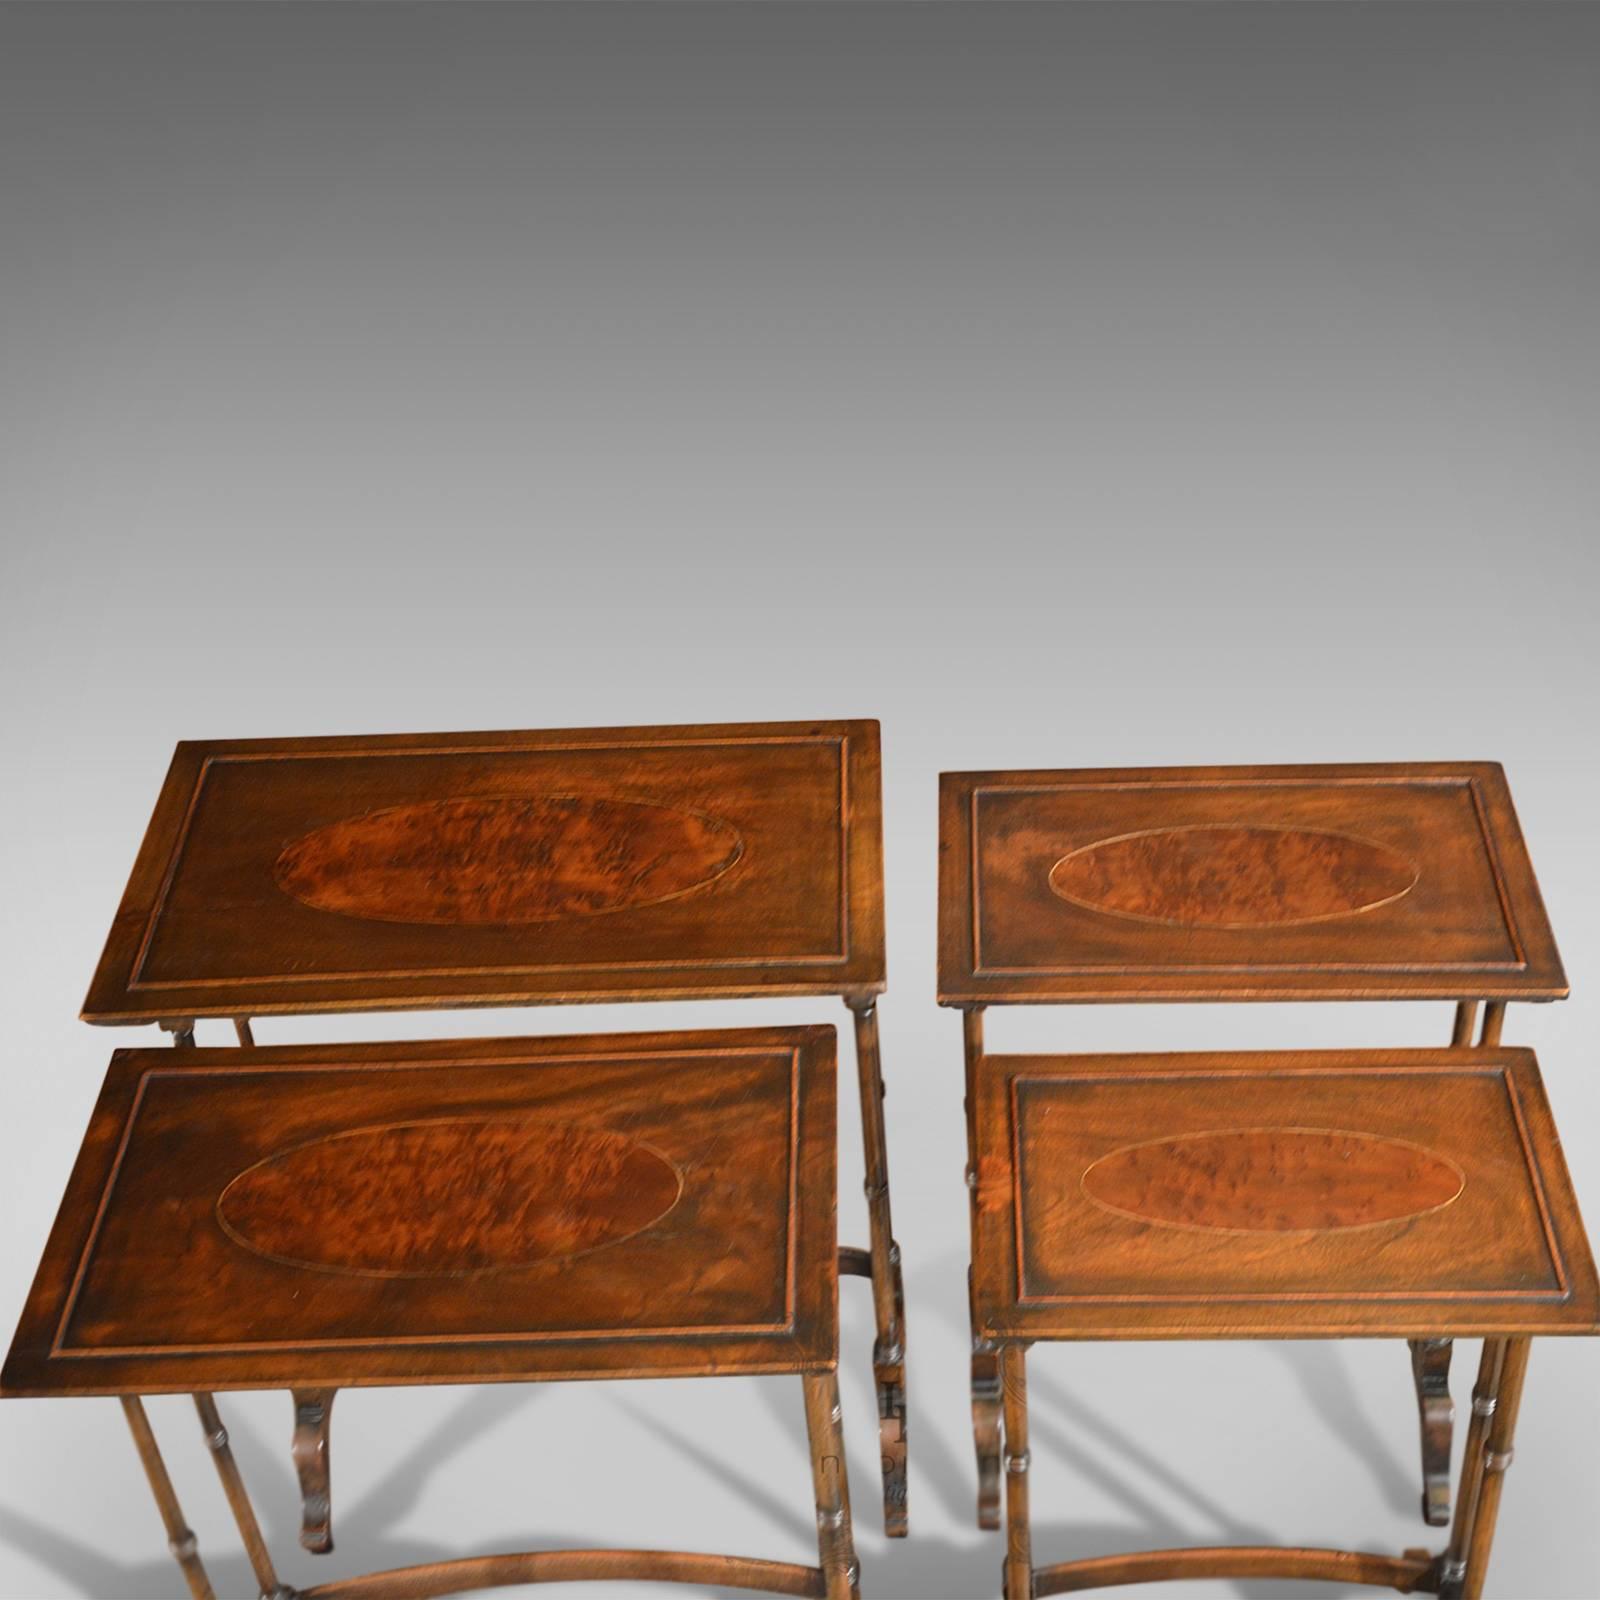 British Antique Nest of Tables in Walnut, Late Victorian